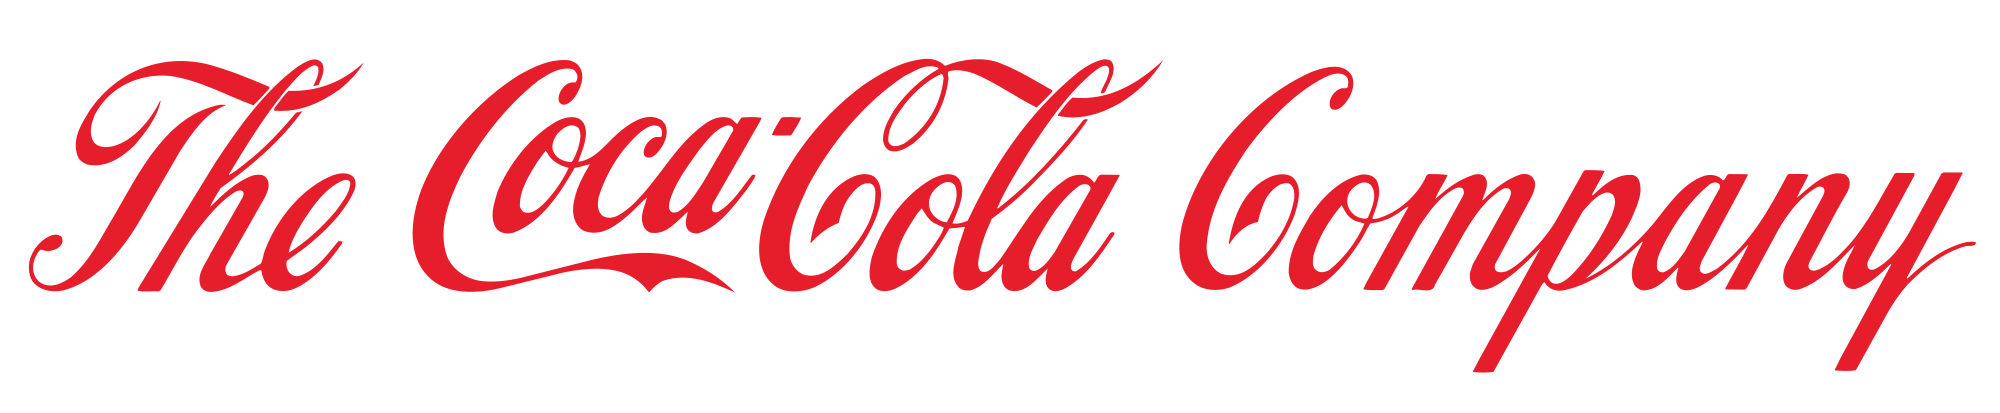 cocacola_logo_PNG3.png